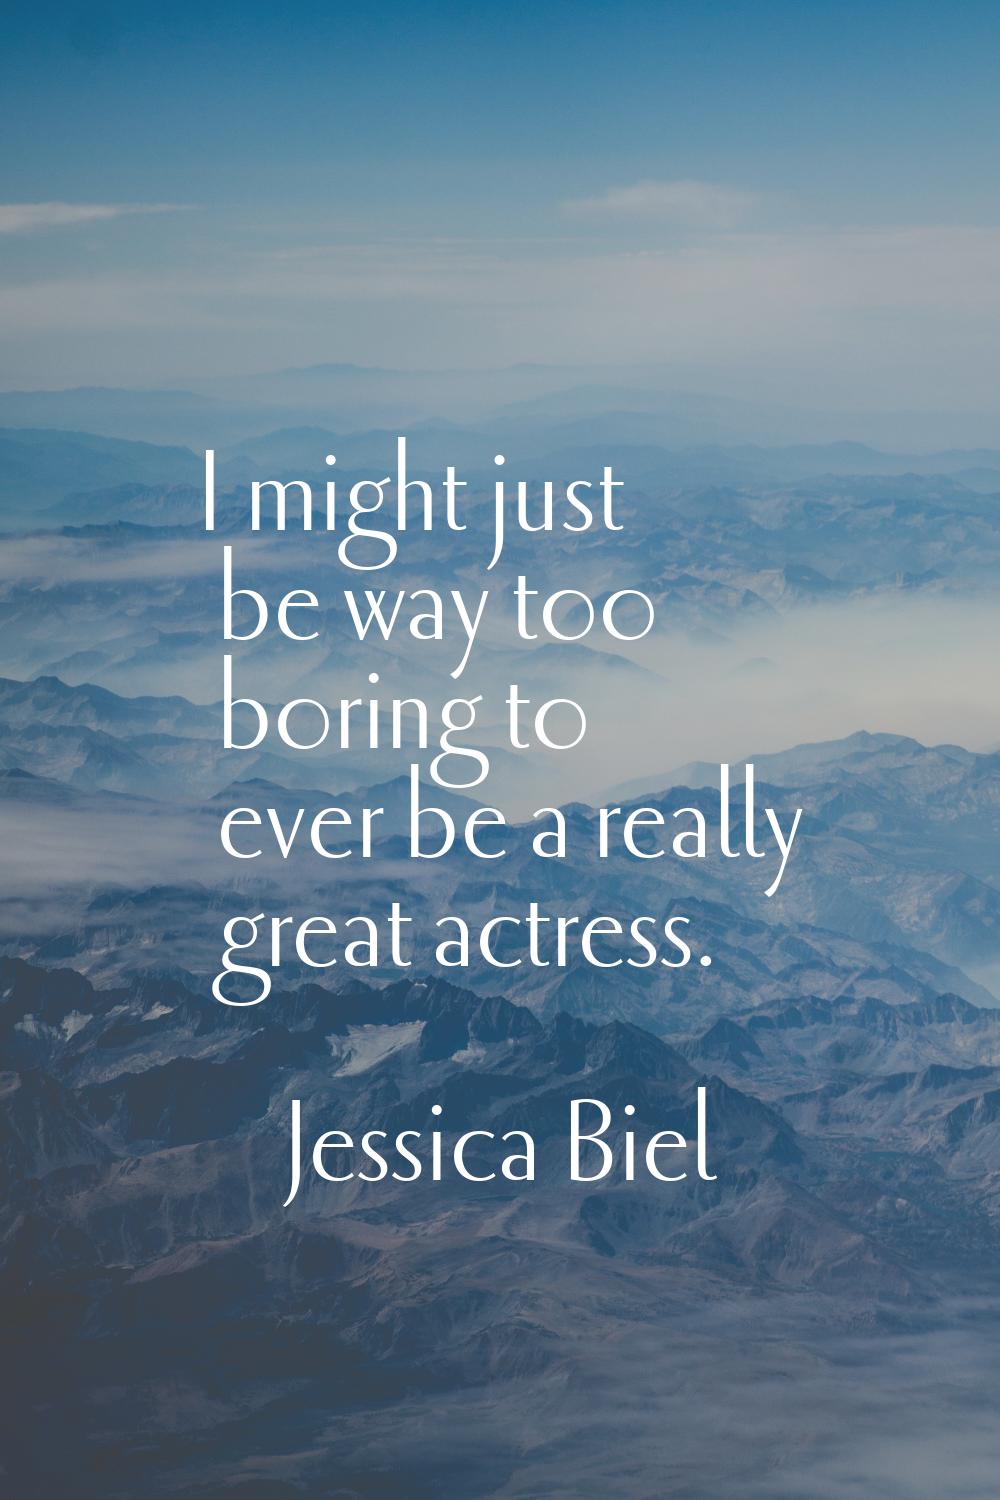 I might just be way too boring to ever be a really great actress.